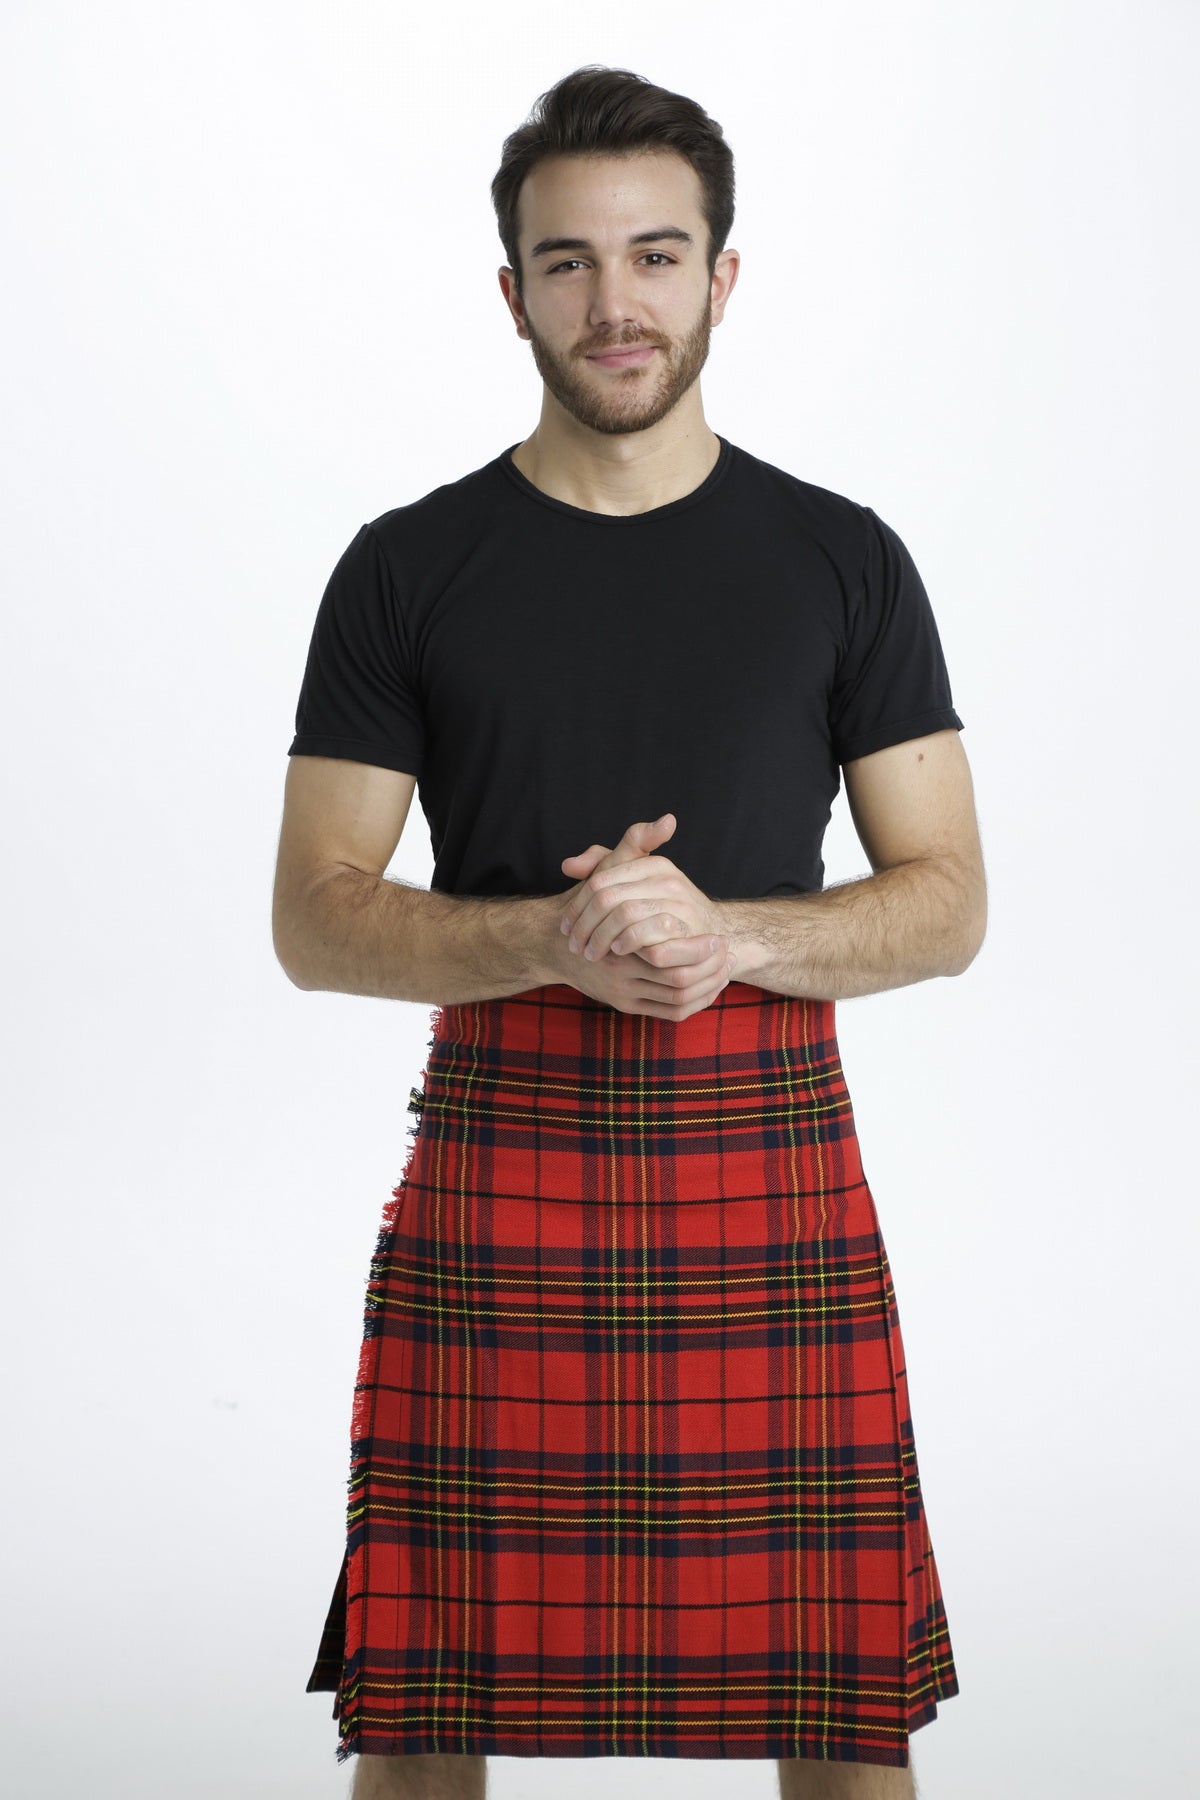 Traditional 8 yard kilt - Front view